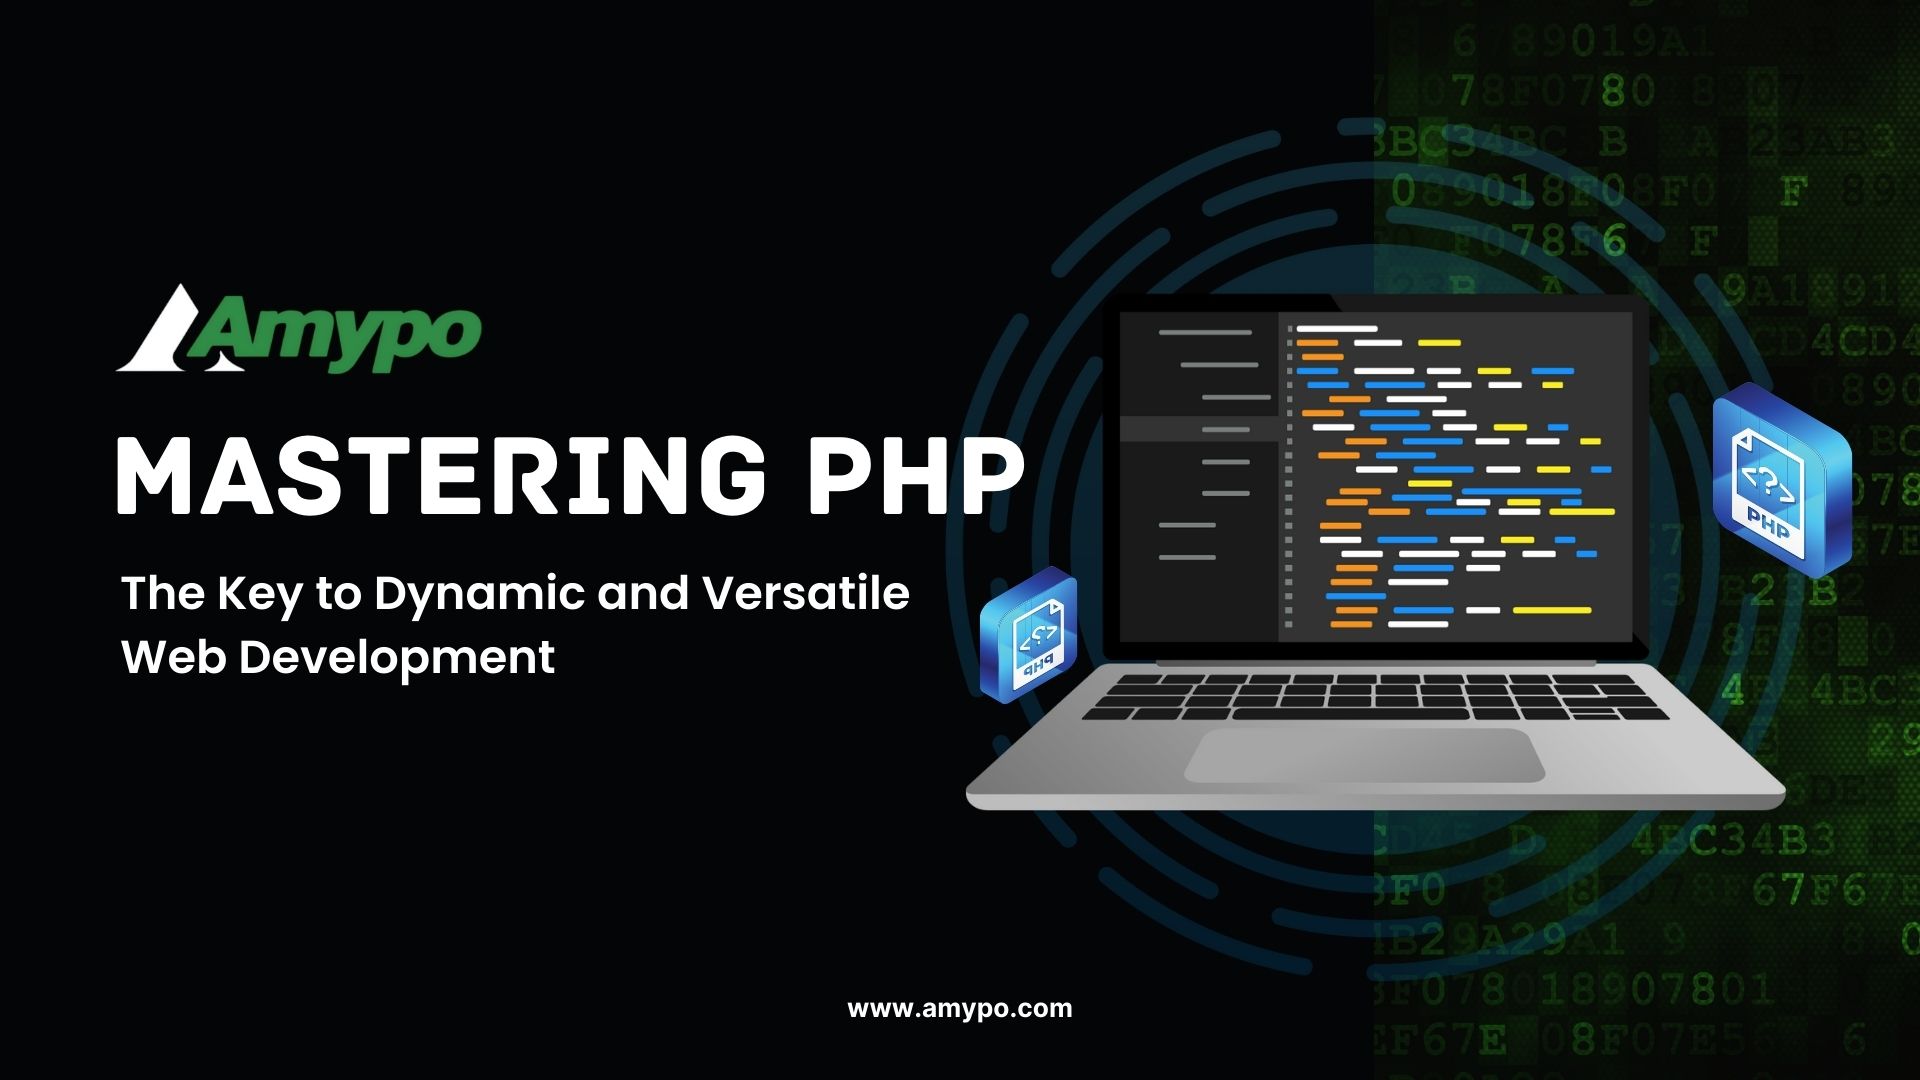 Mastering PHP: The Key to Dynamic and Versatile Web Development”